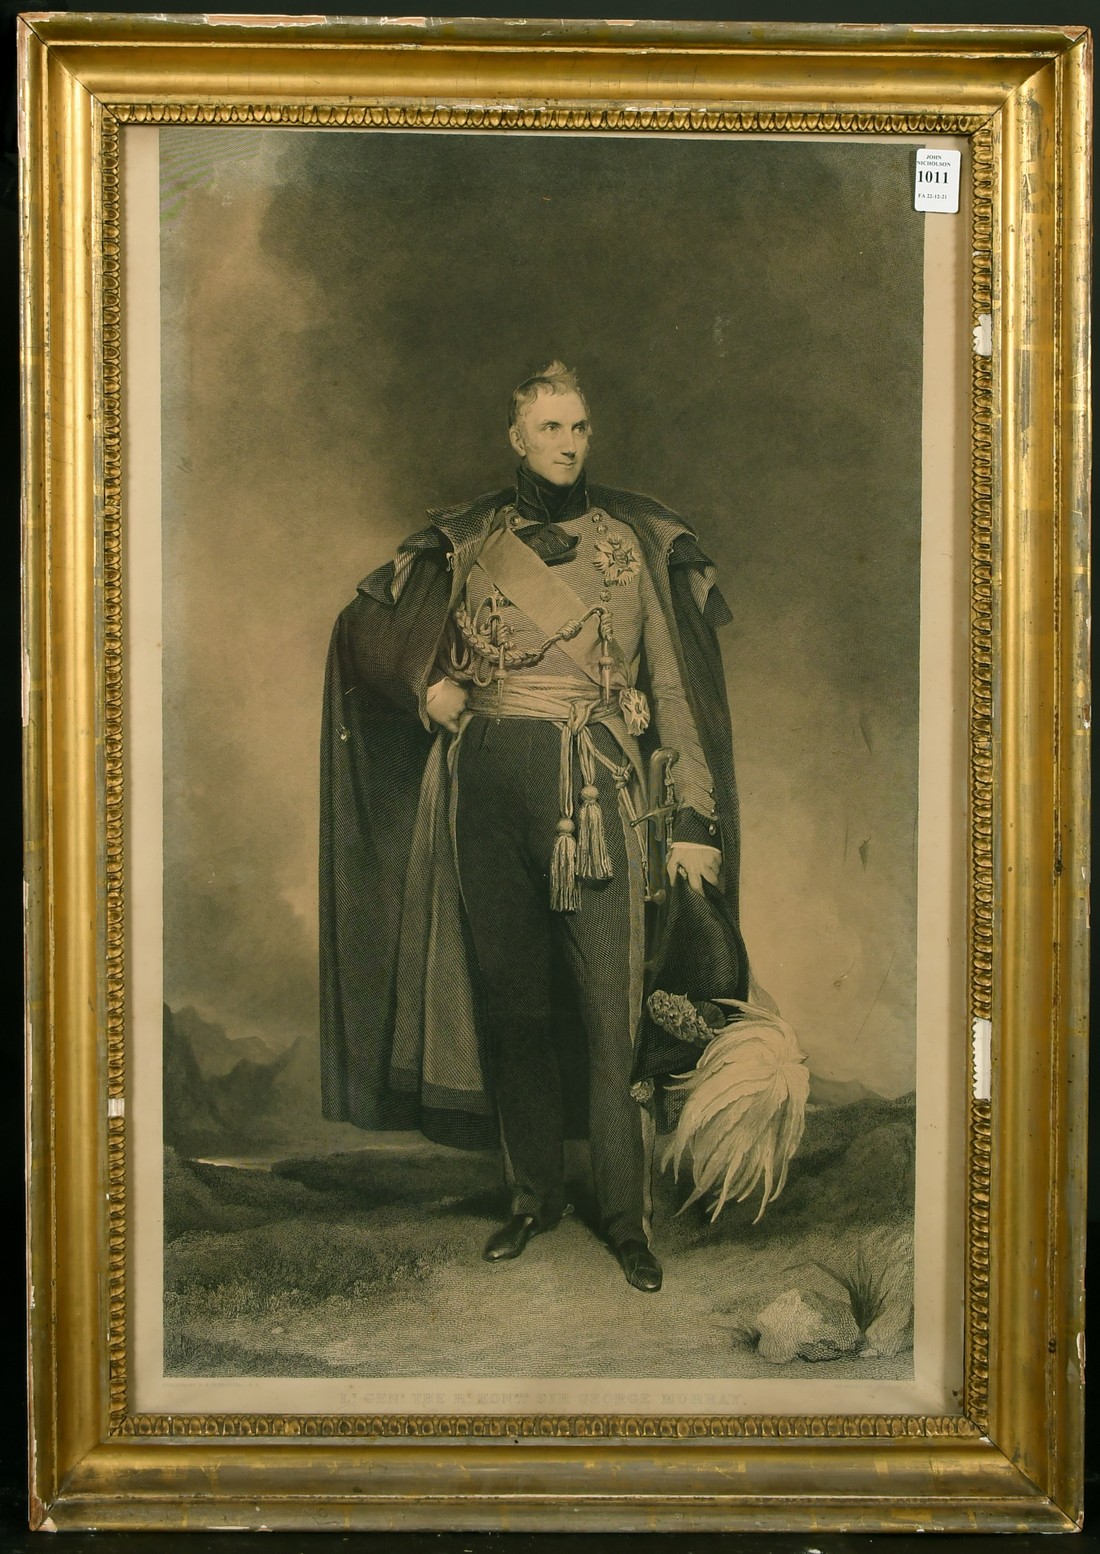 Fox after Pickersgill, 'Lieutenant-General Sir George Murray, 1772 - 1846, Soldier and Statesman', - Image 2 of 3